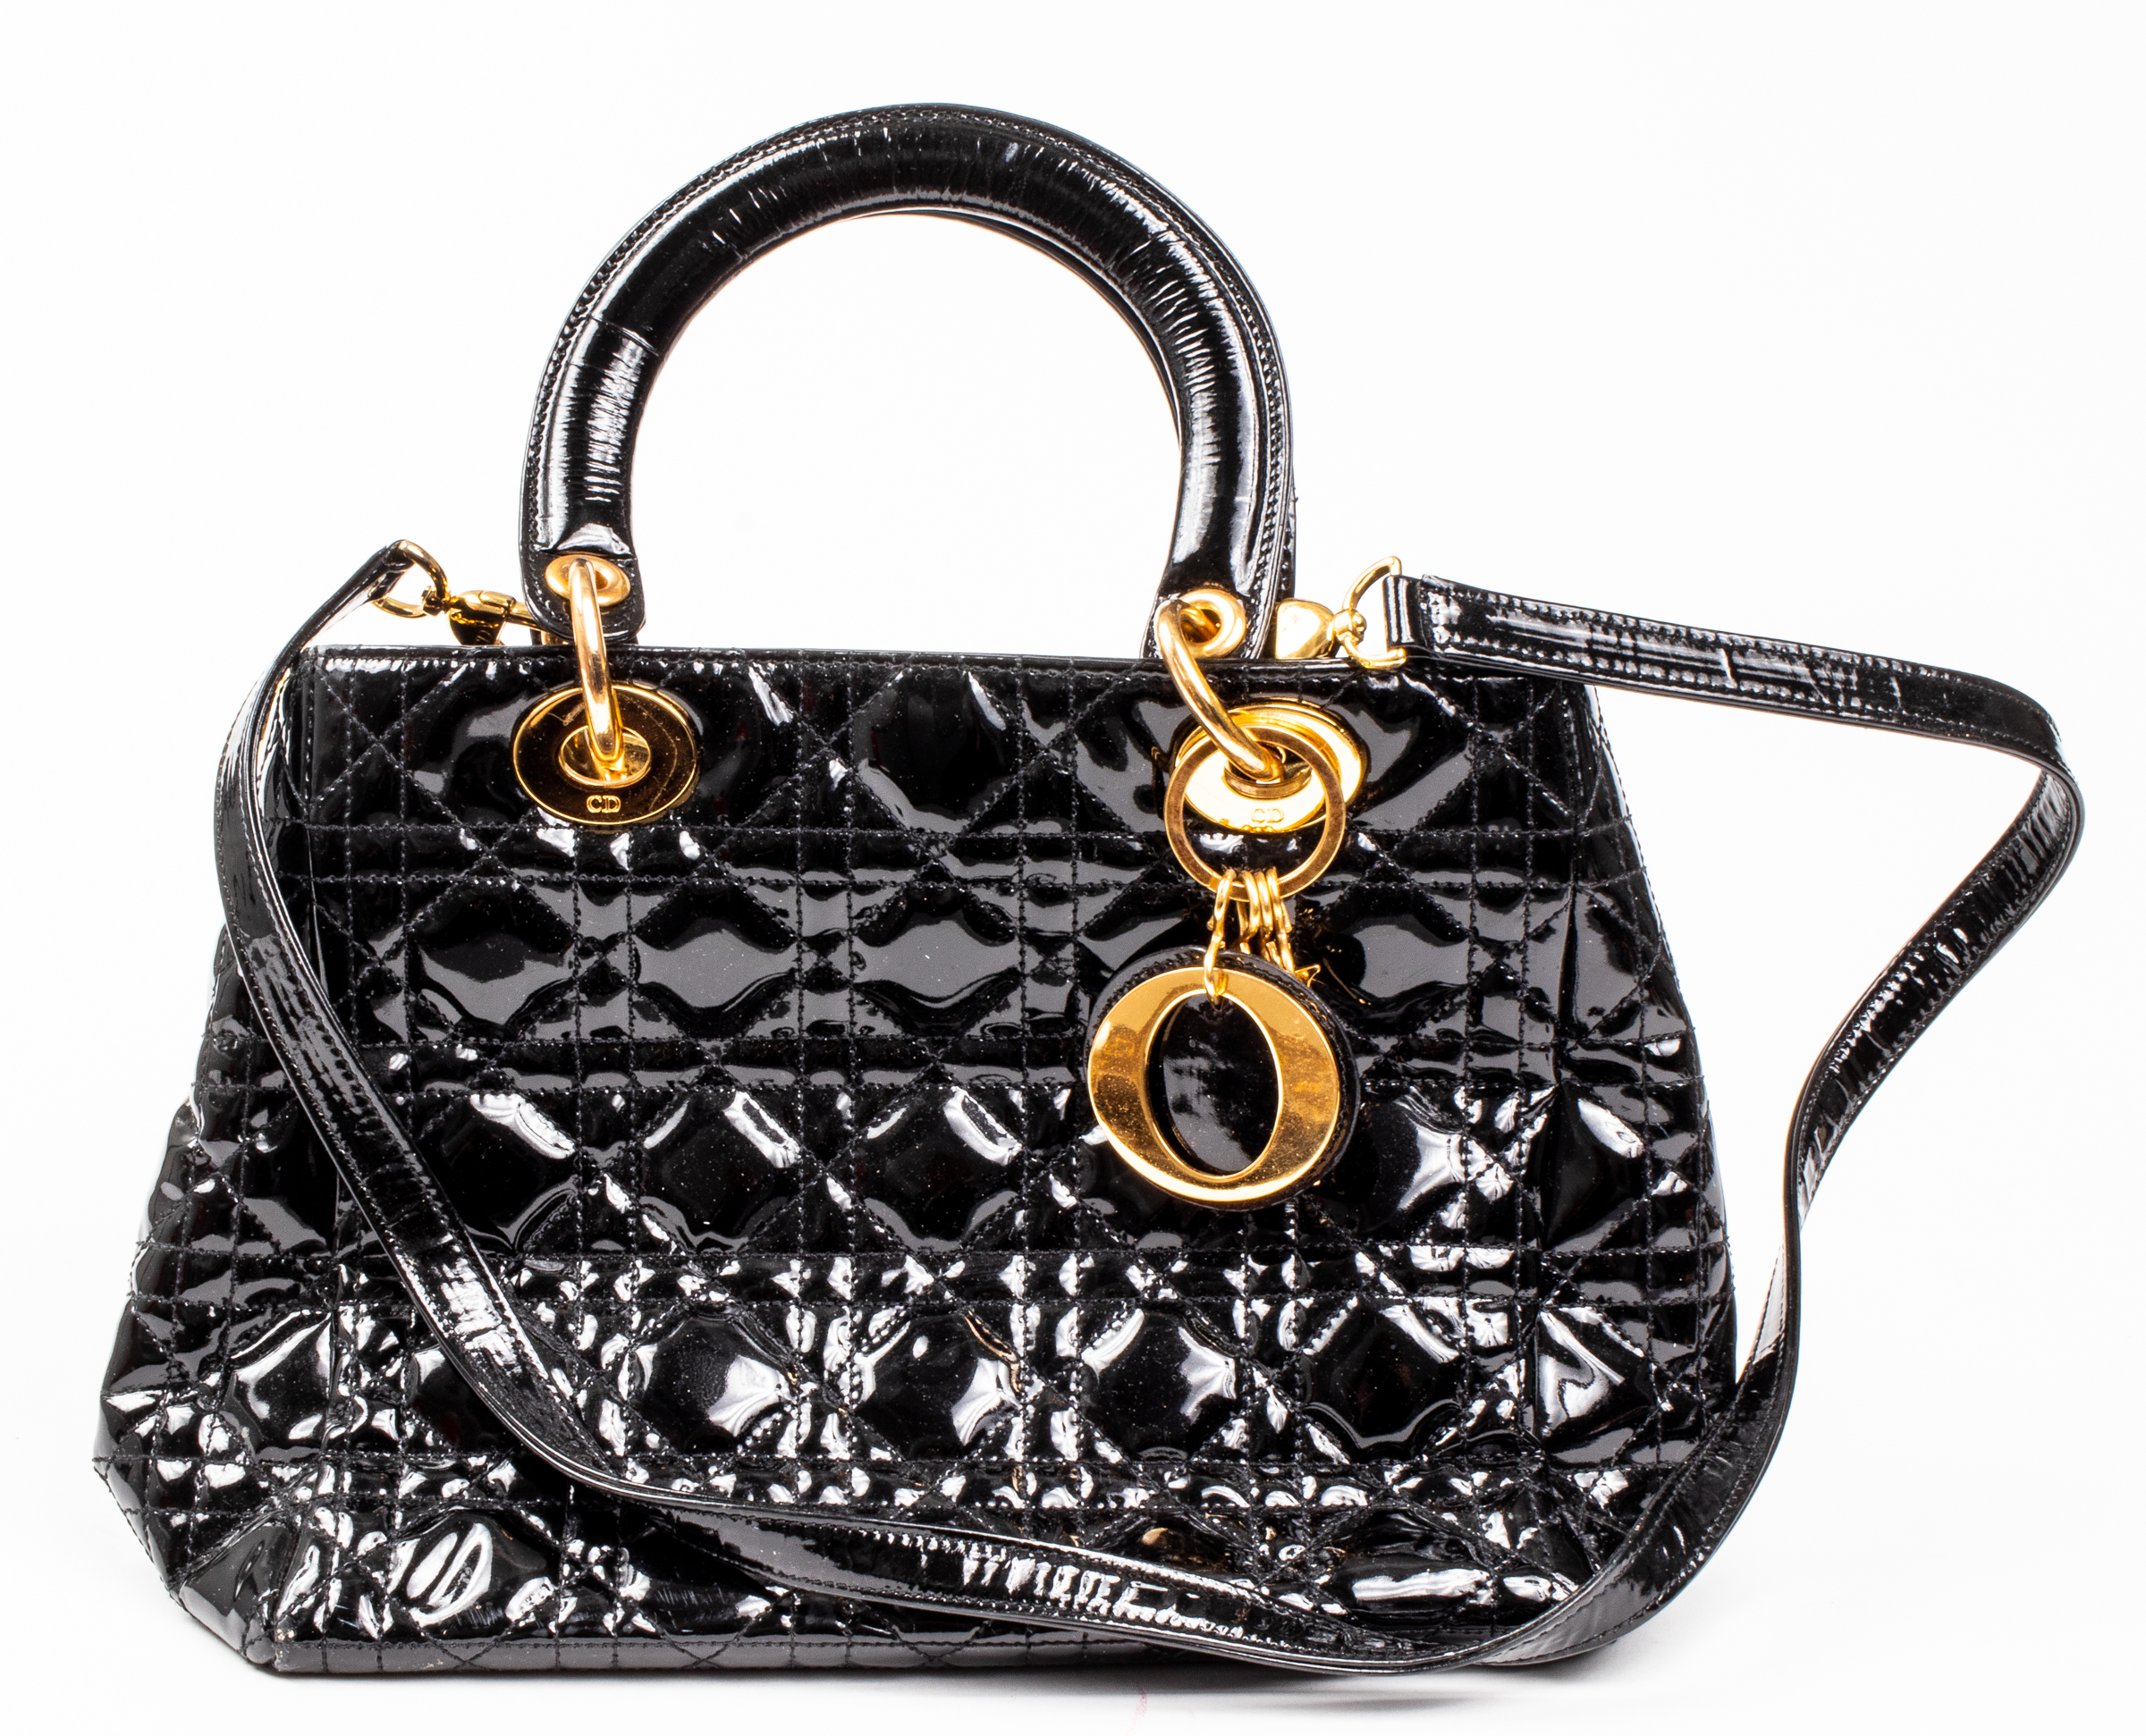 BLACK QUILTED PATENT LEATHER HANDBAG